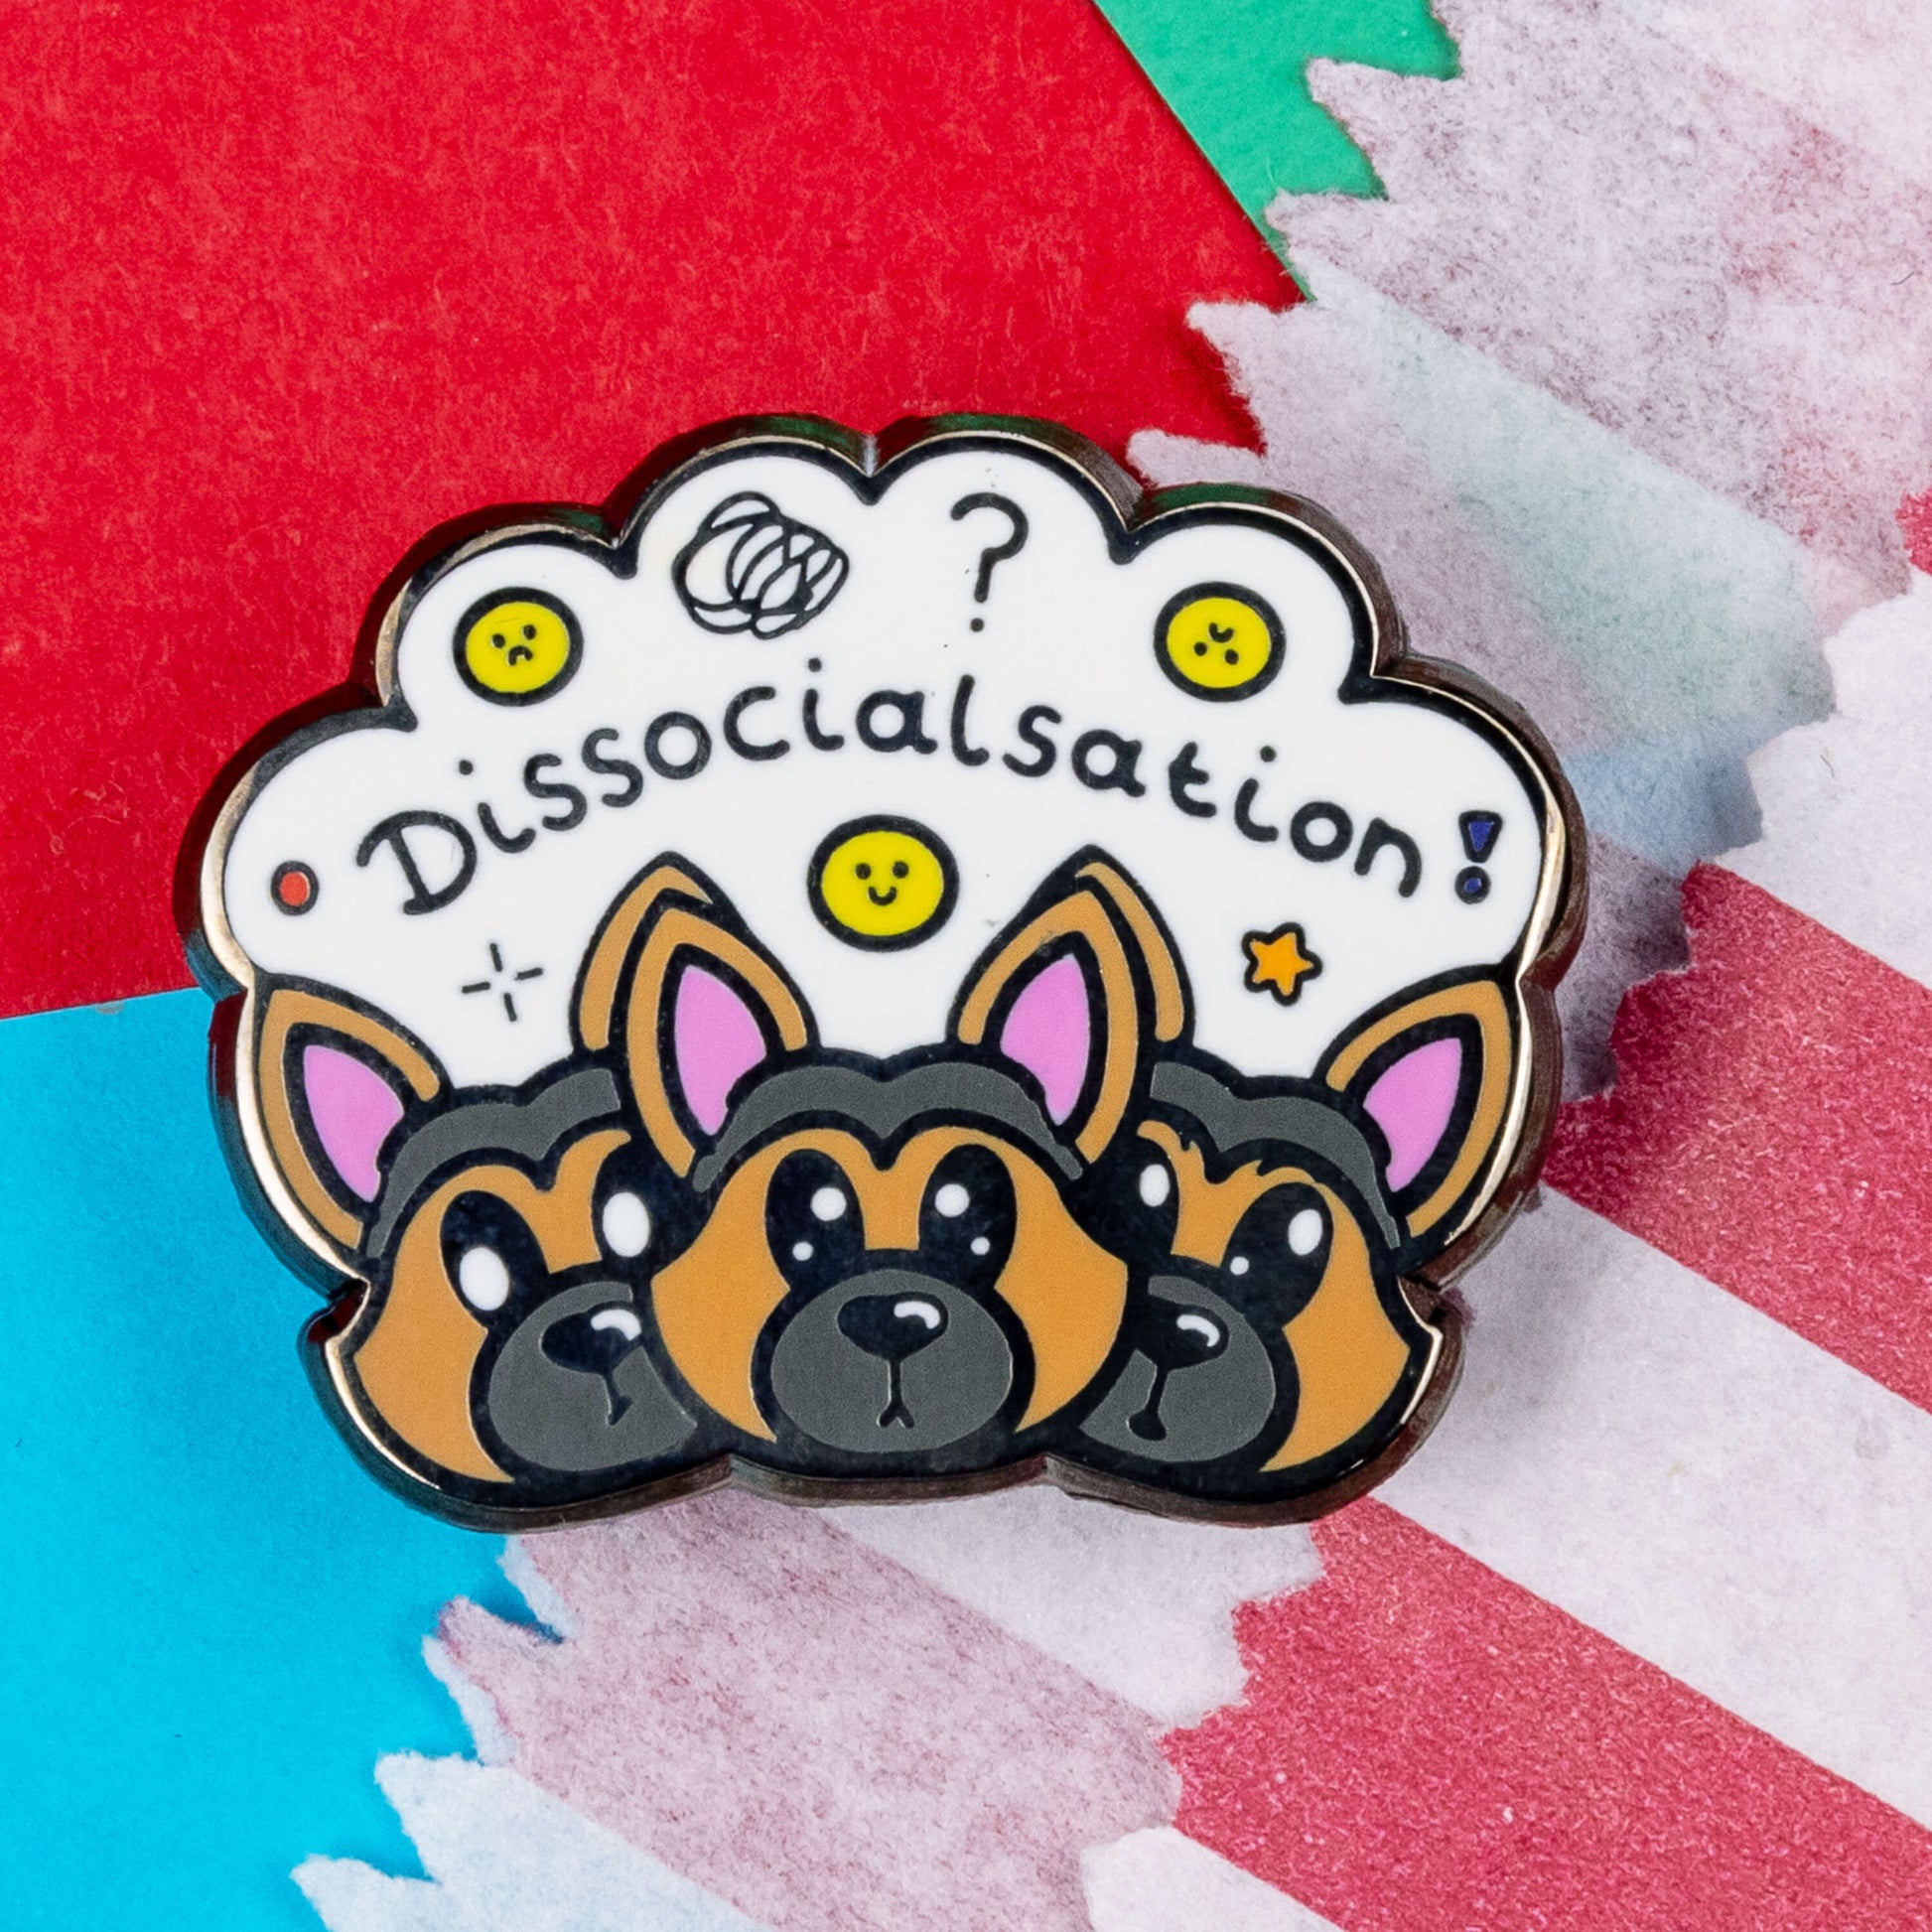 The Dissocialsation Enamel Pin - Dissociation on a red, teal and blue background next to a red and white striped paper bag. Three confused brown and black Alsatian dog heads with their ears perked up, above them is a white cloud with sad and happy yellow faces, sparkles, question marks and black text reading 'dissocialsation!'. The design is raising awareness for dissociation.